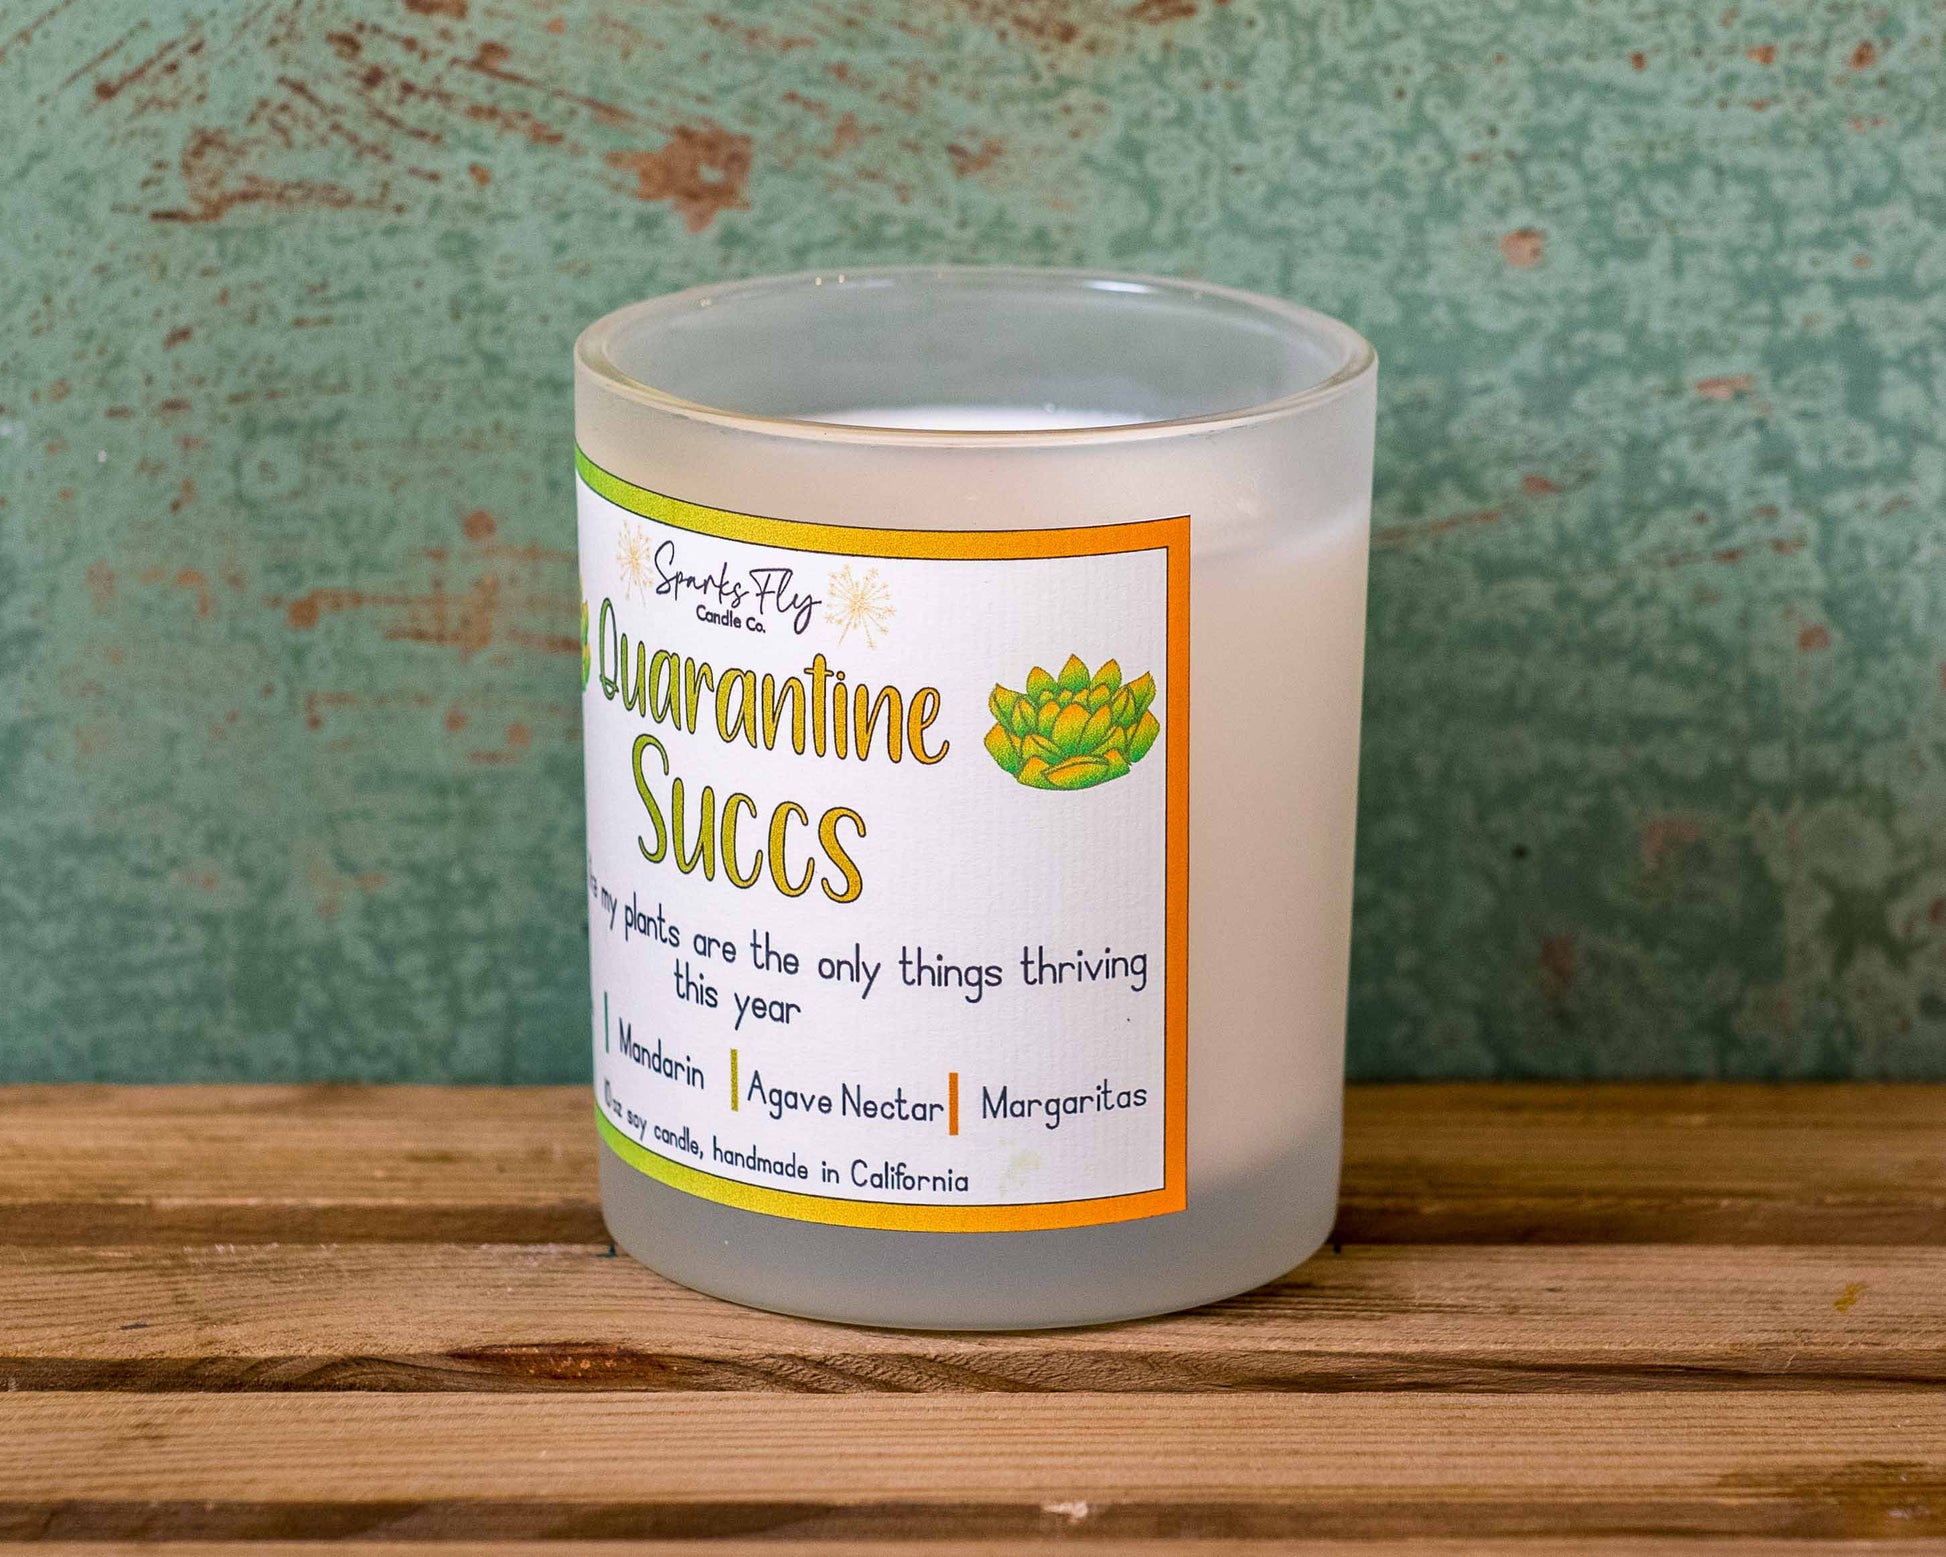 Quarantine Succs Candle - A nod to thriving plants amidst a year of staying in.